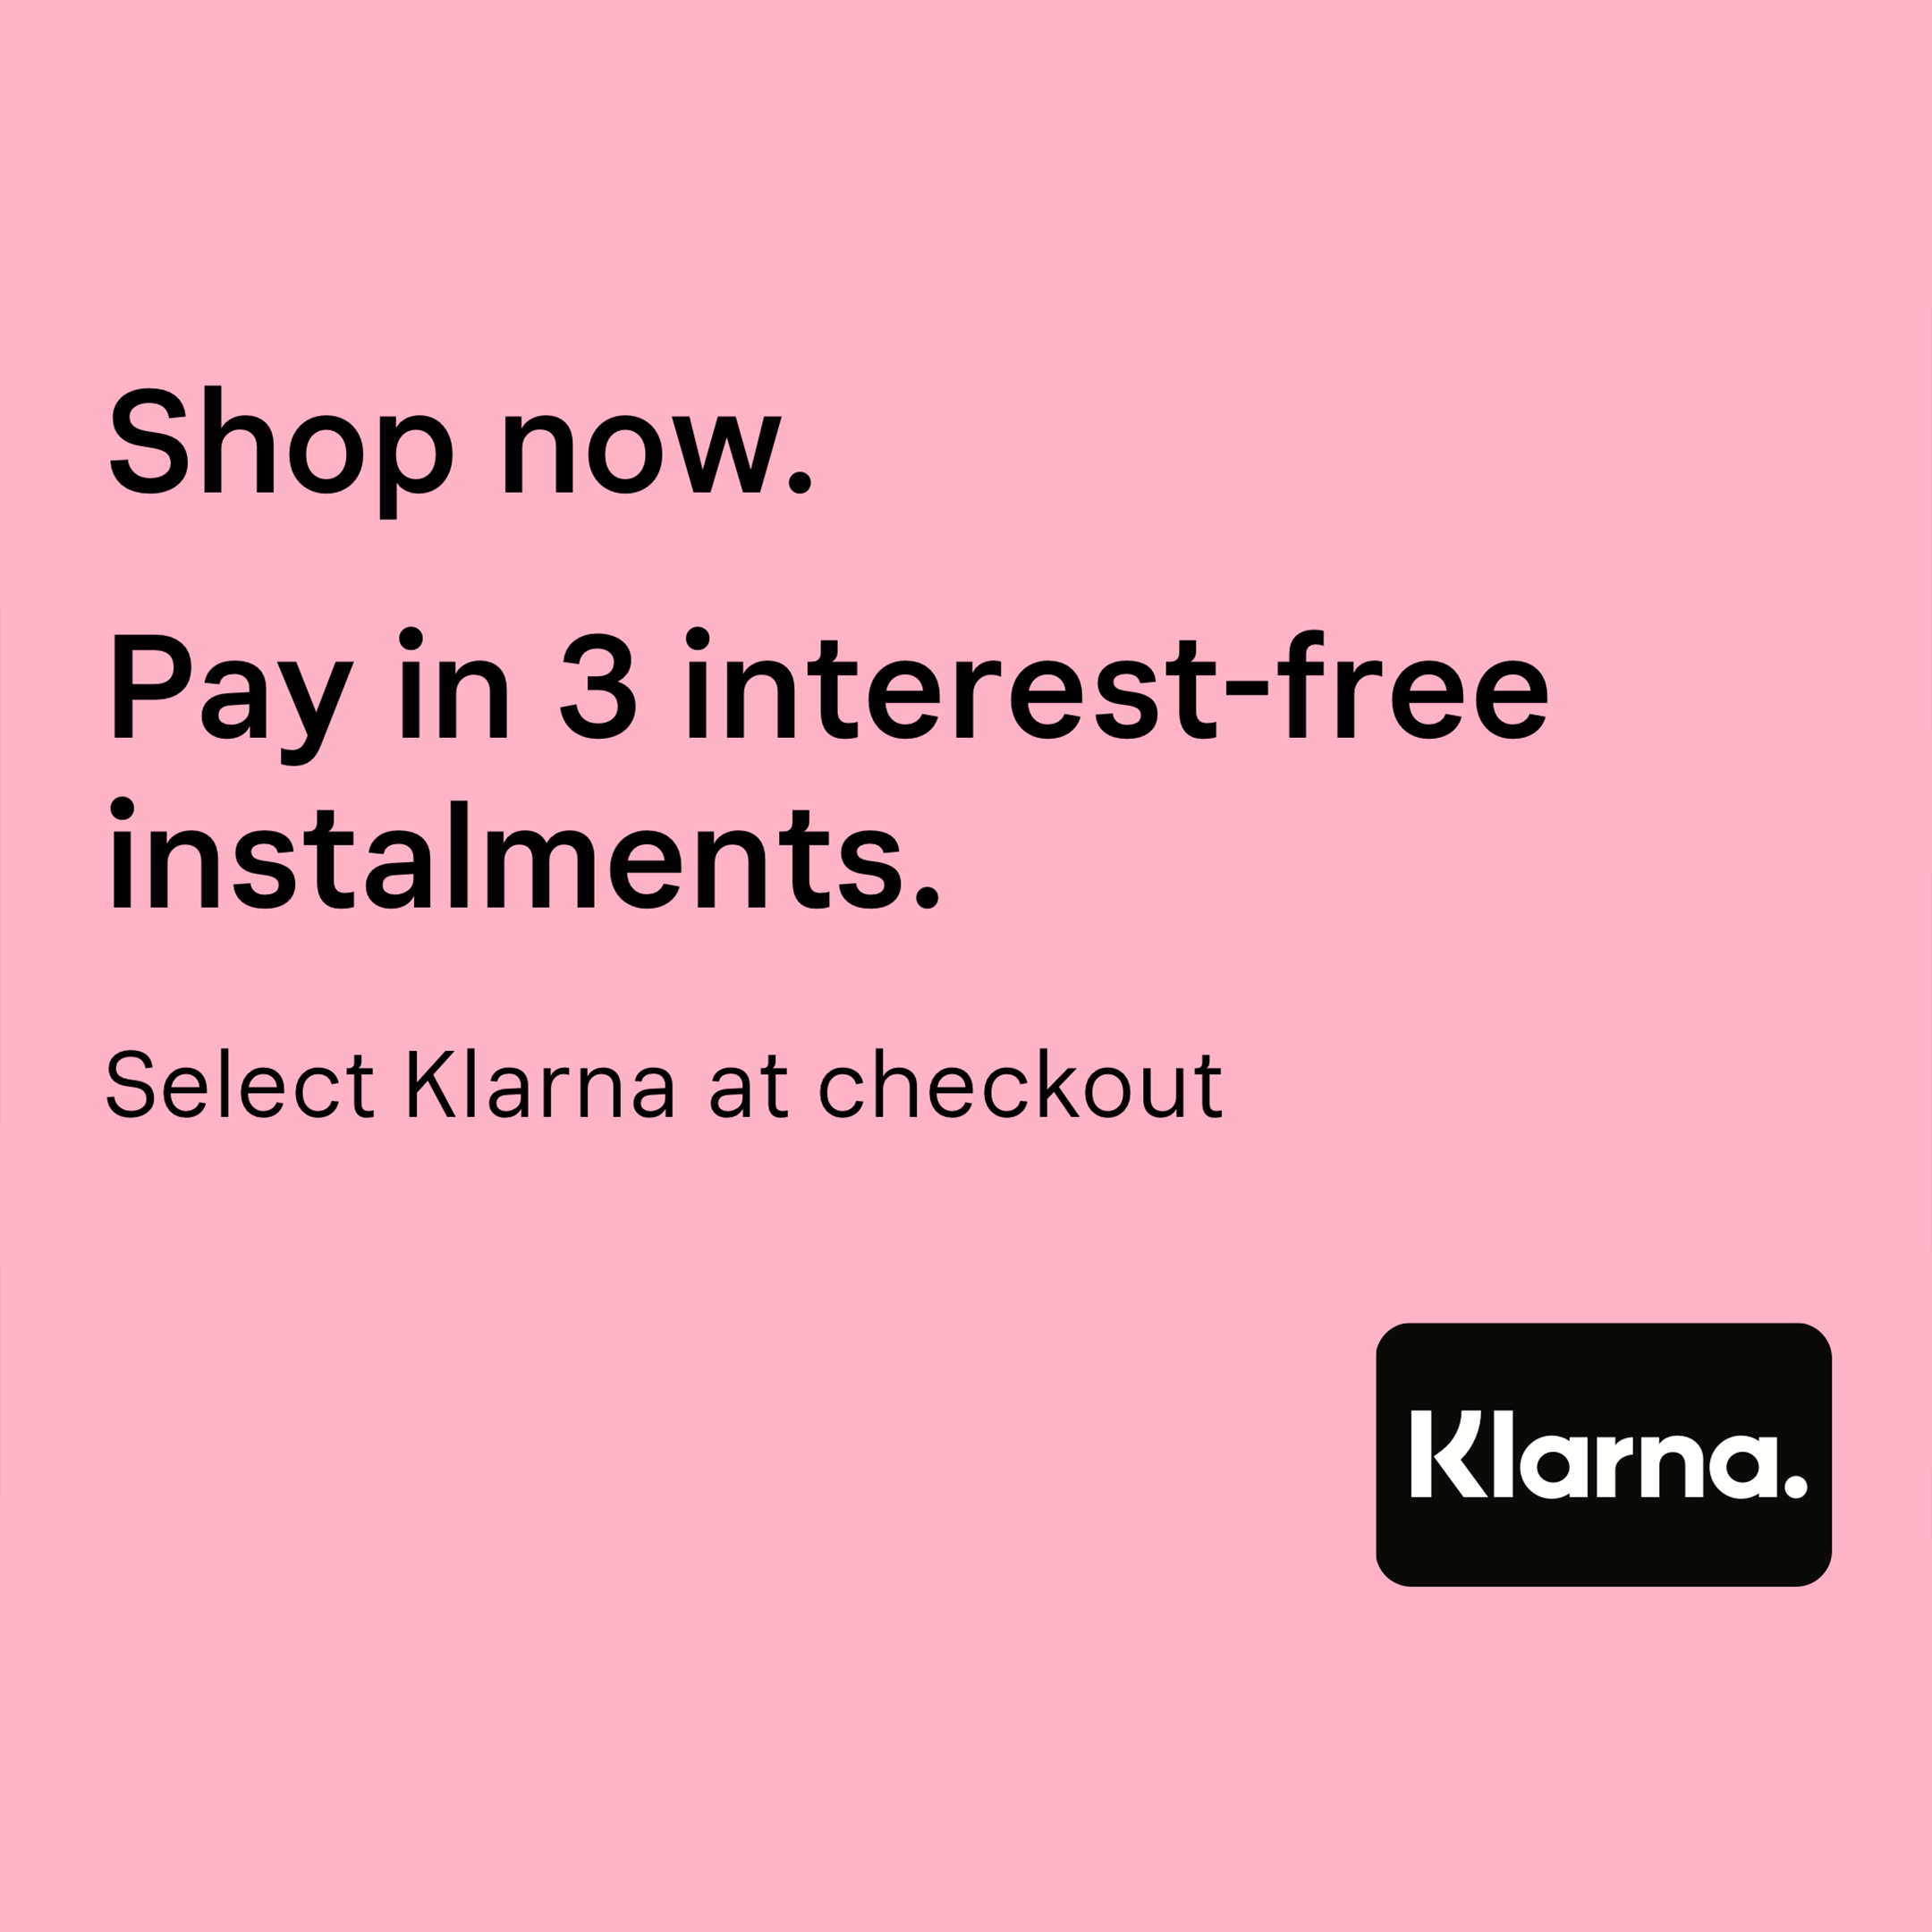 Payments by Klarna